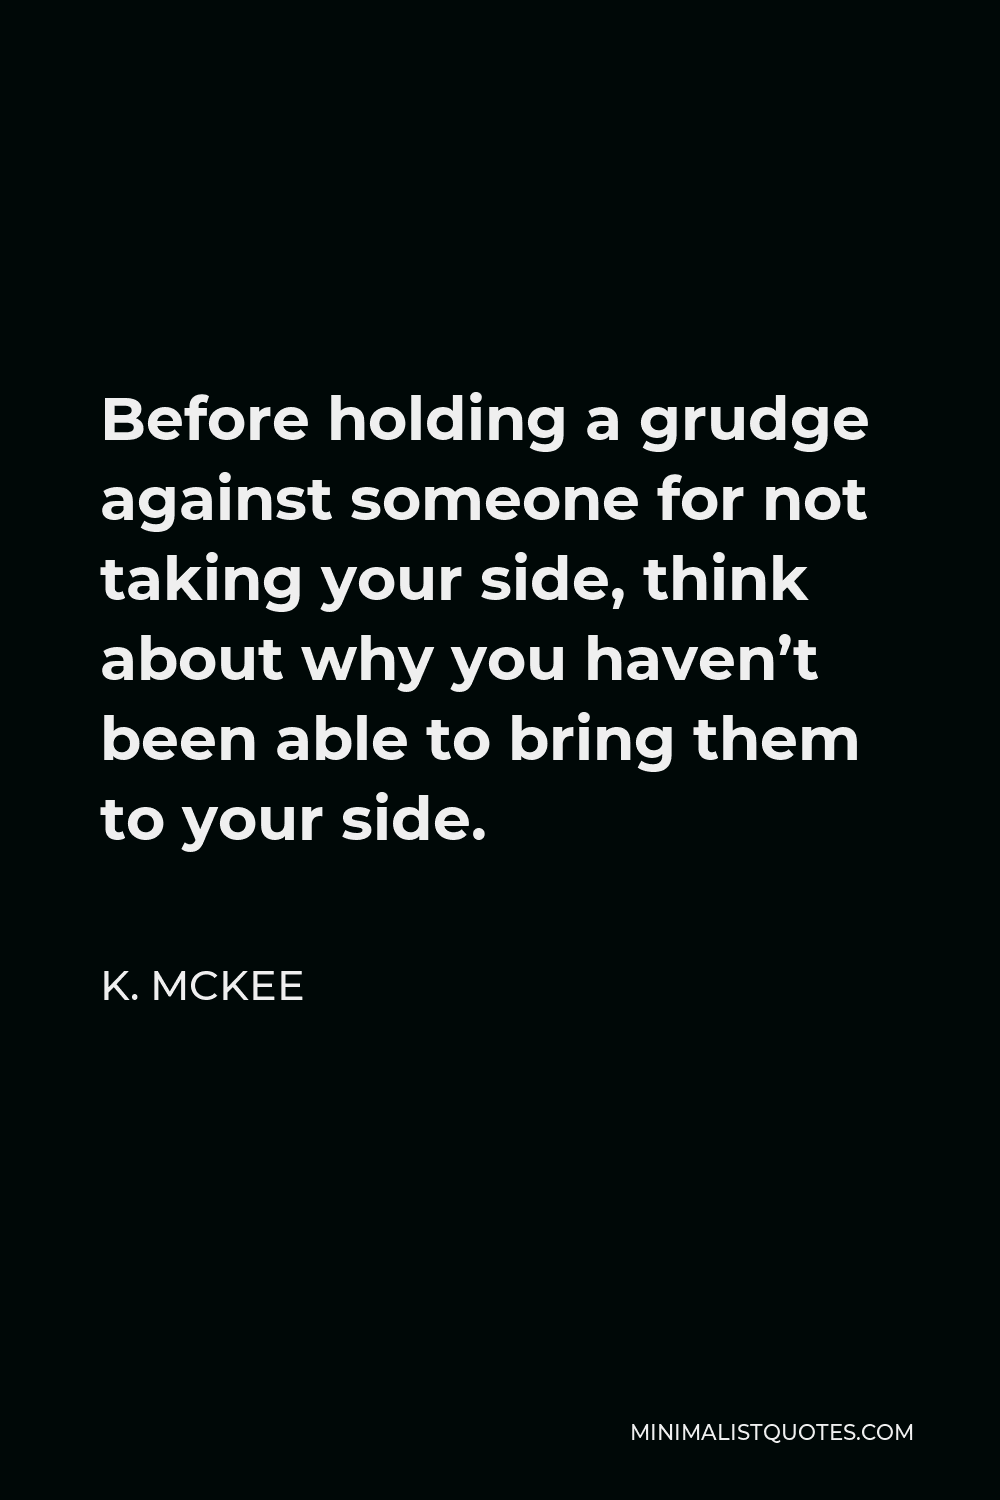 K. Mckee Quote - Before holding a grudge against someone for not taking your side, think about why you haven’t been able to bring them to your side.